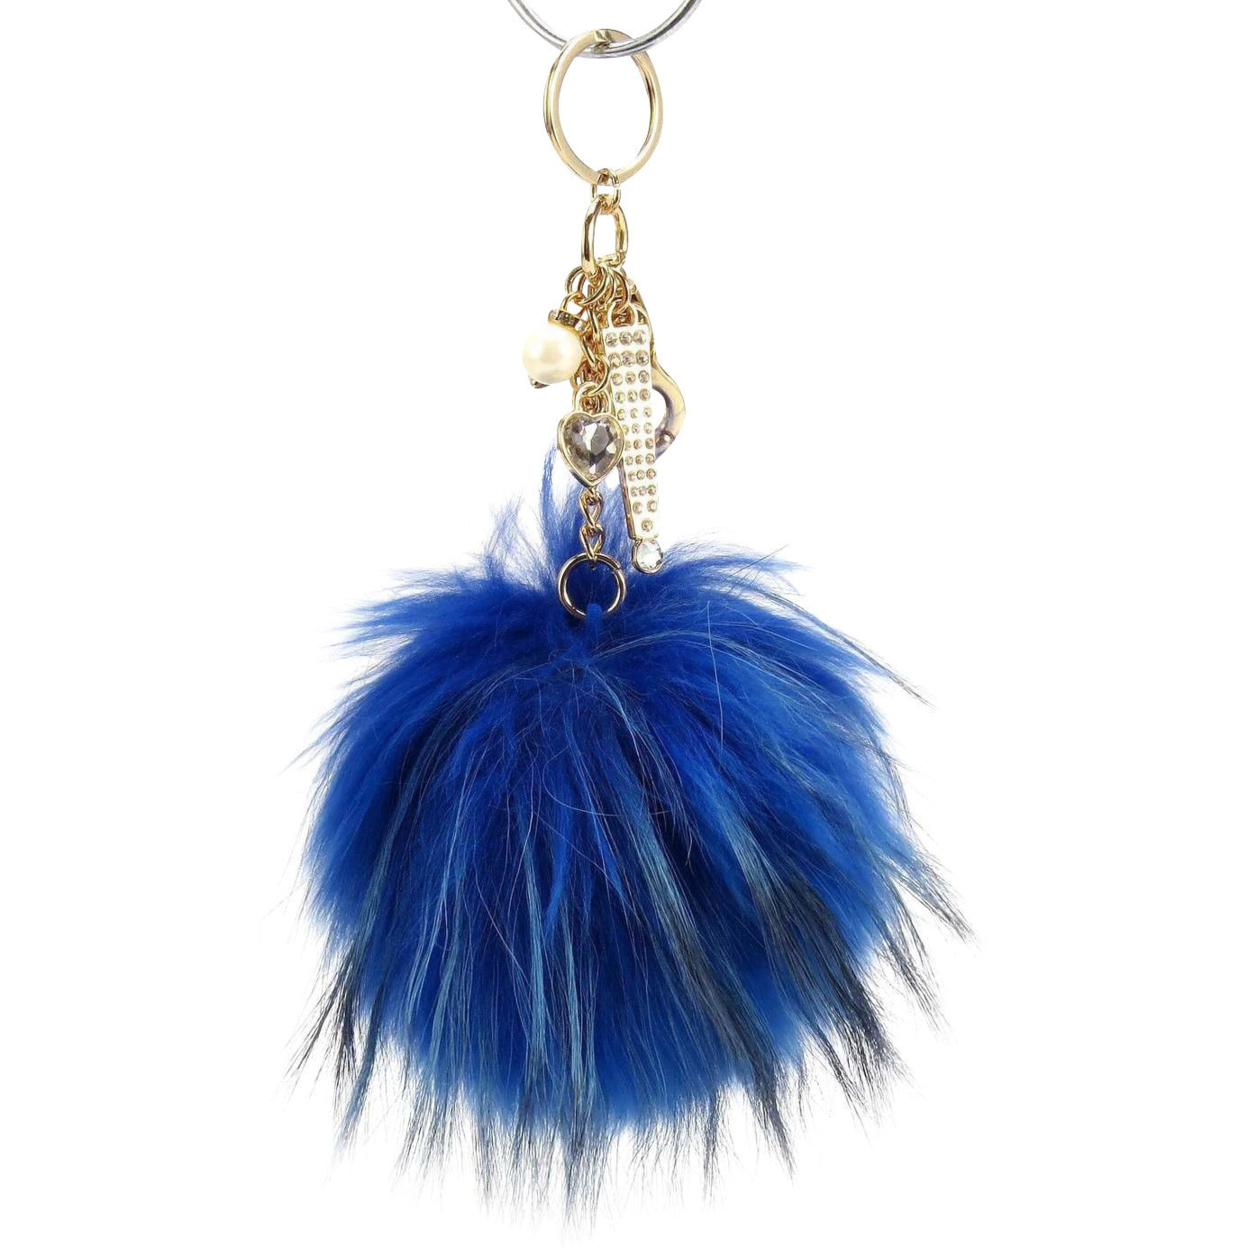 Real Fur Puff Ball Pom-Pom 6 Accessory Dangle Purse Charm - French Blue With Gold Hardware